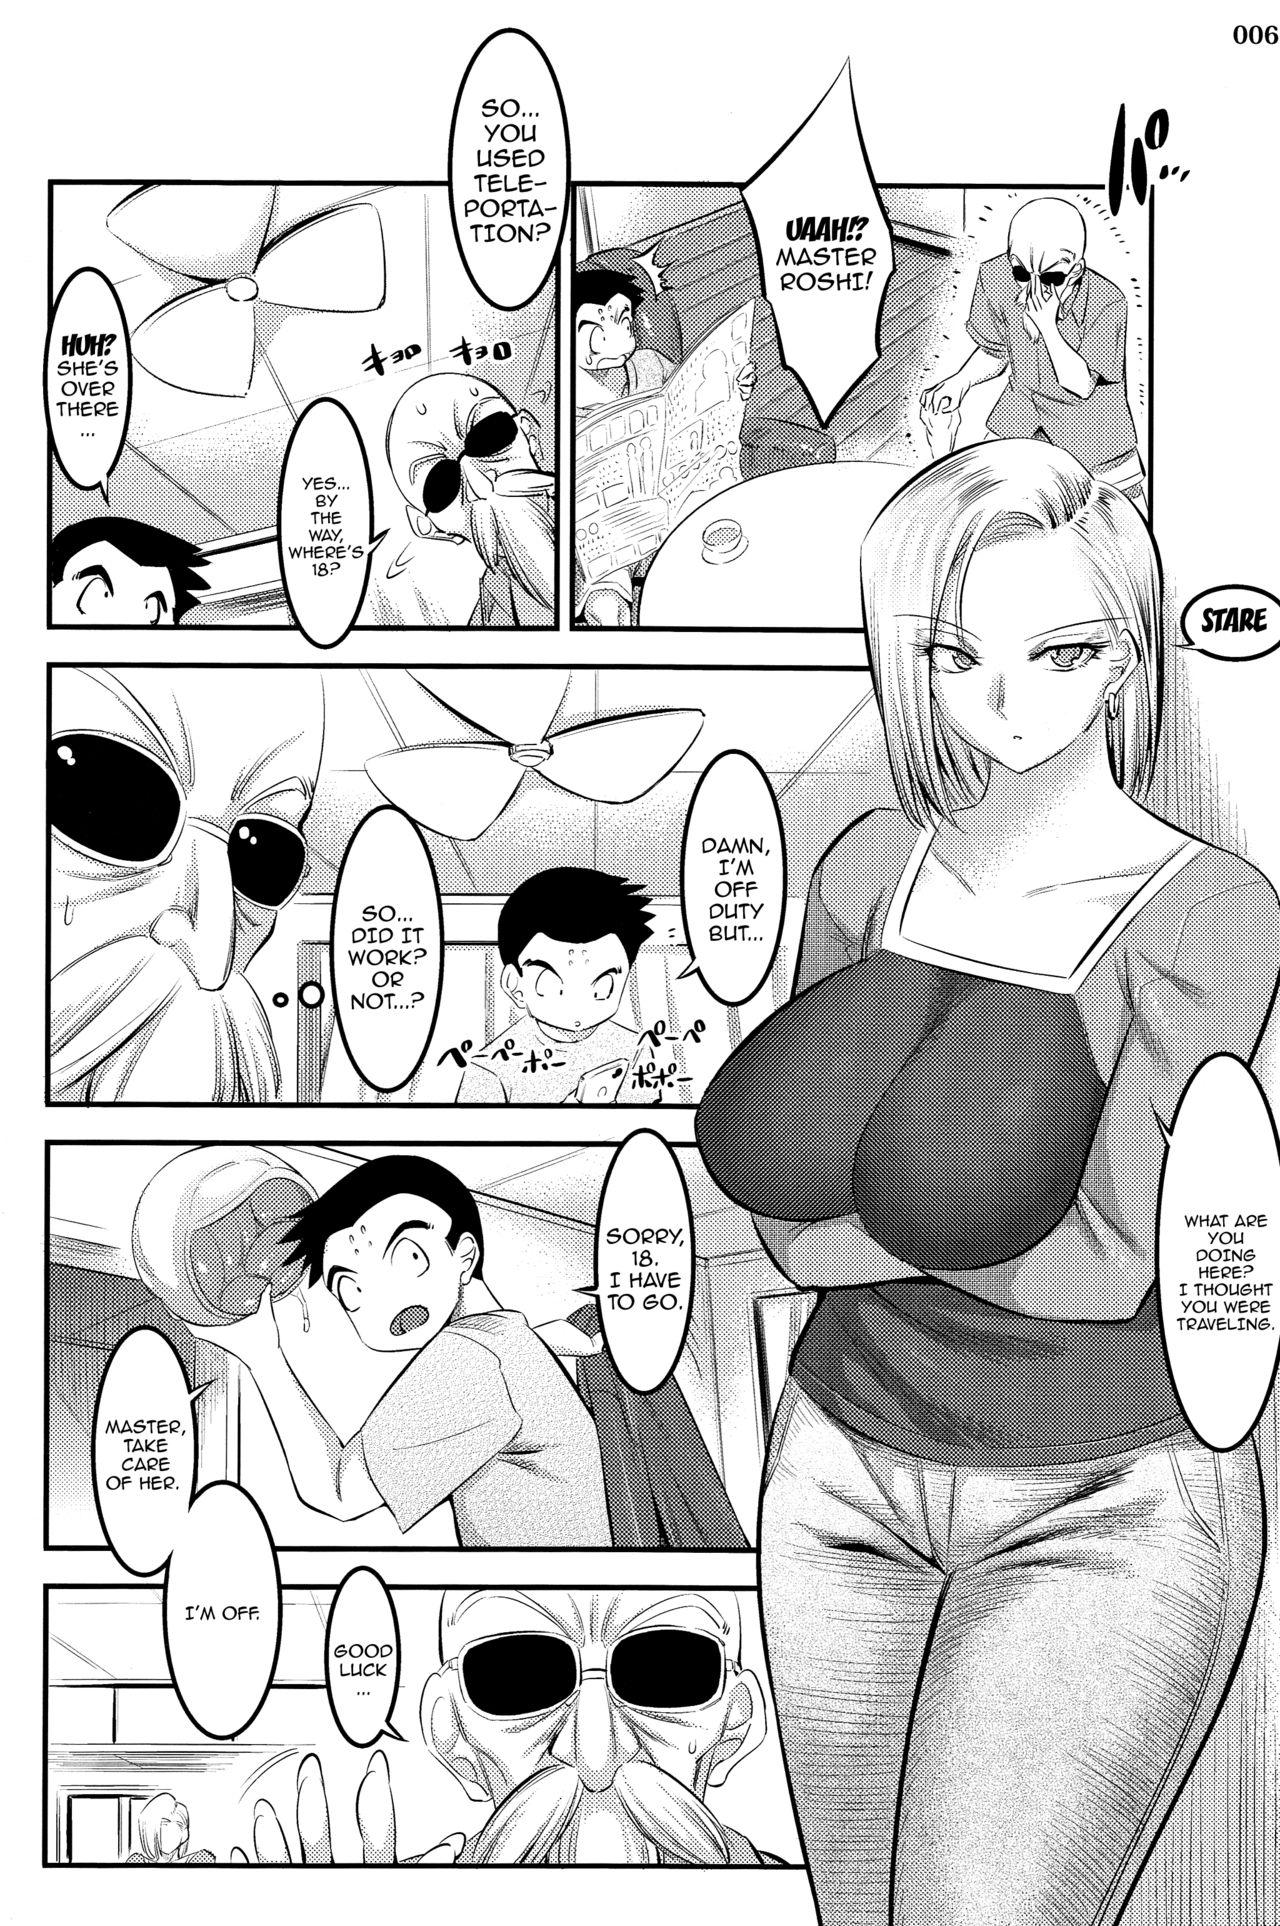 Tiny Titties A Story About How Android 18 Squeezes Me Dry Everyday - Dragon ball z Chunky - Page 5